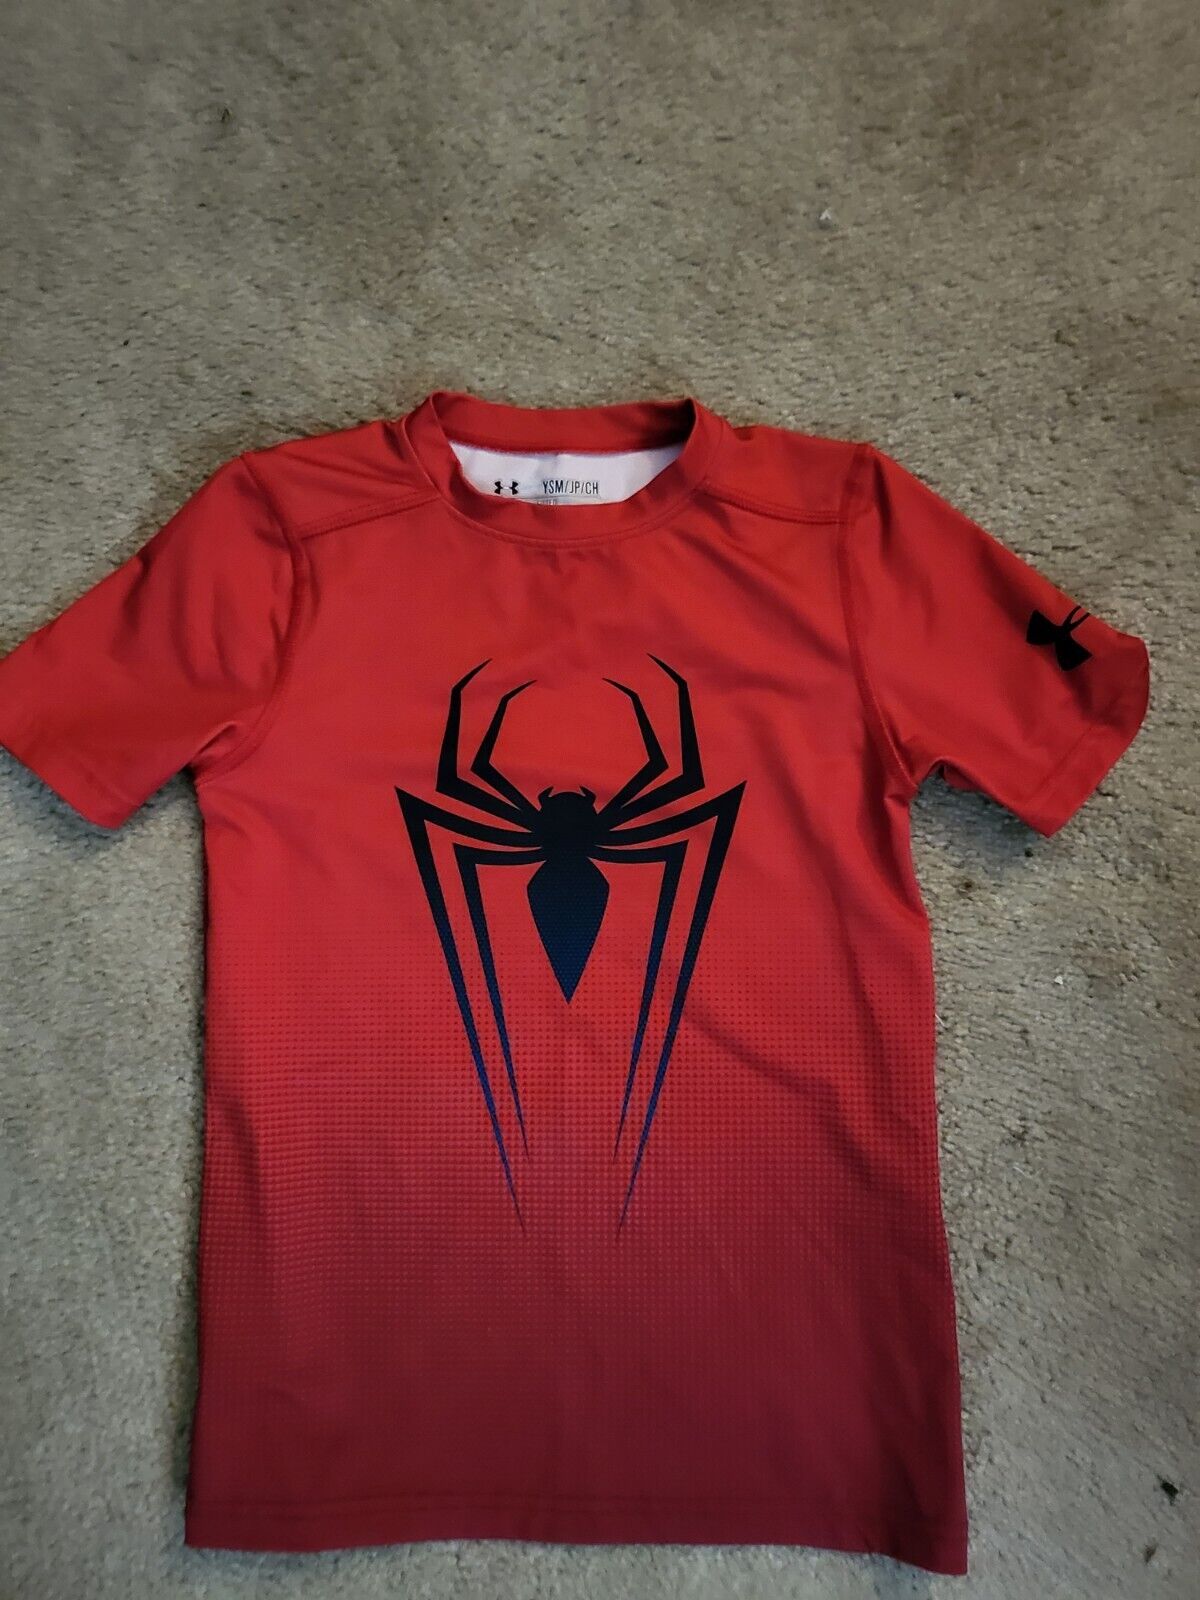 Under Armour Youth Small Marvel Spiderman Compression Heat eBay